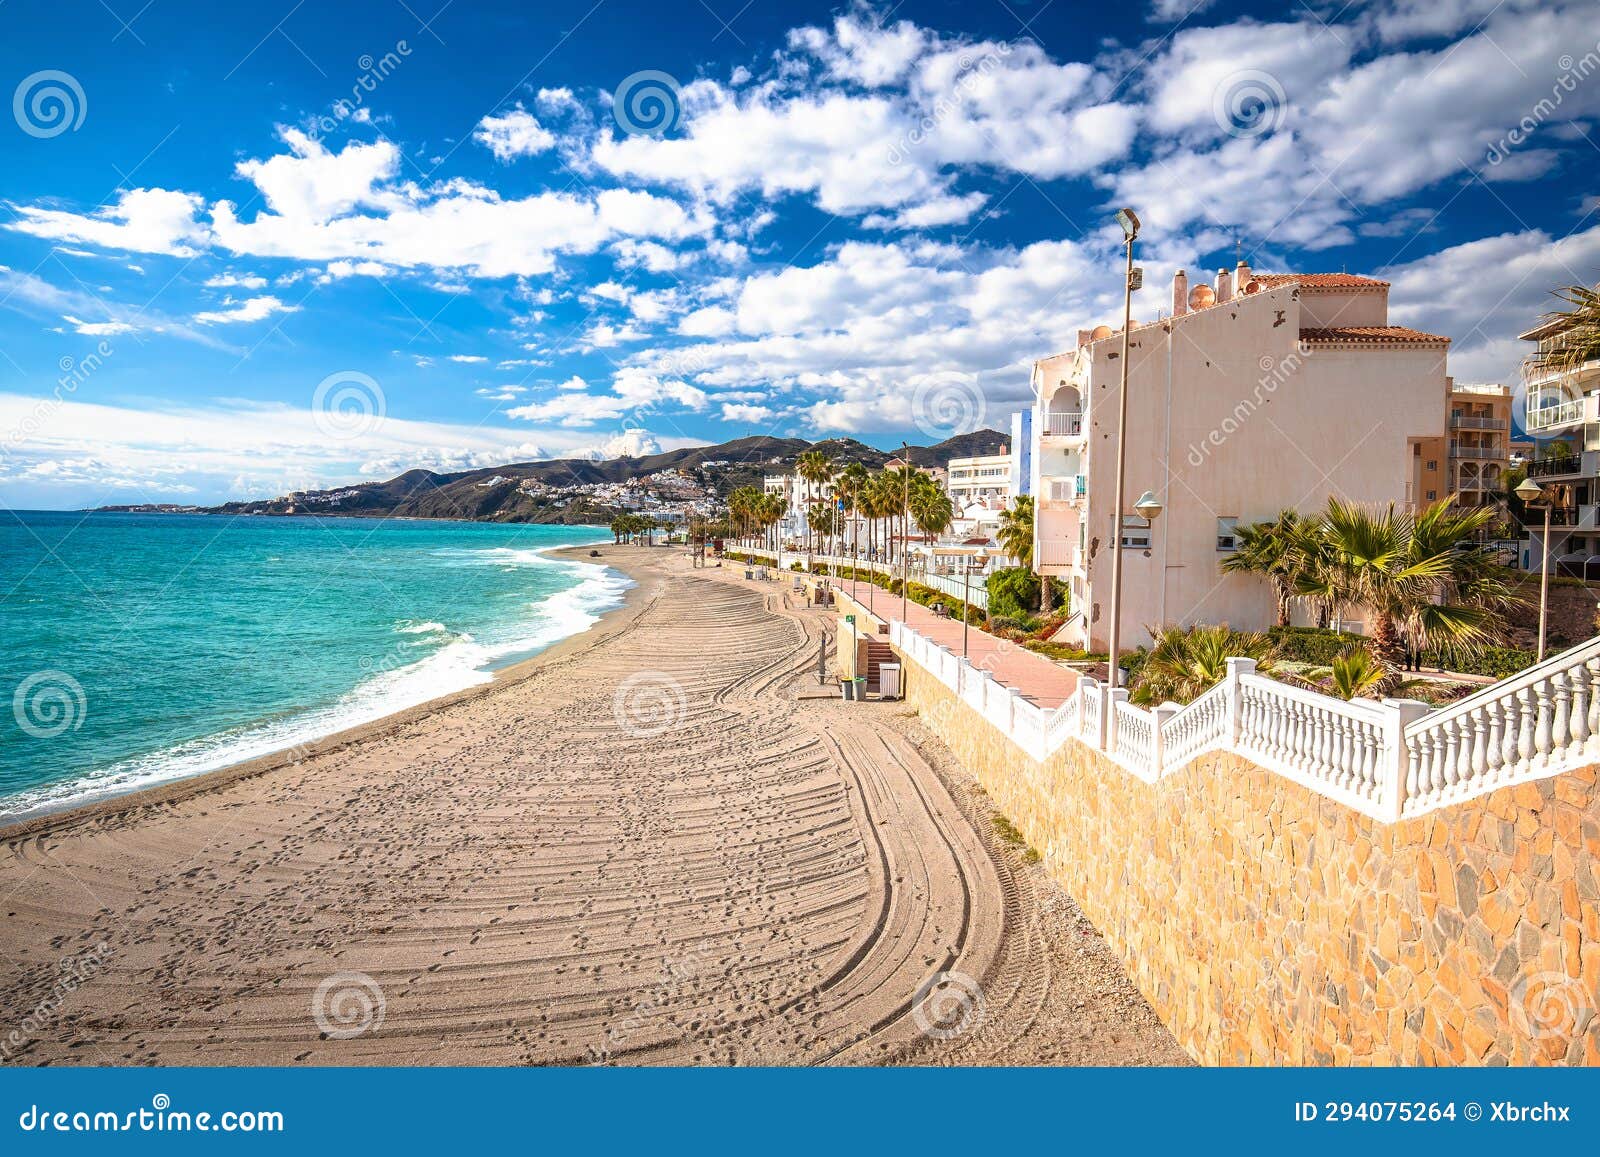 town of nerja turquoise sand beach view